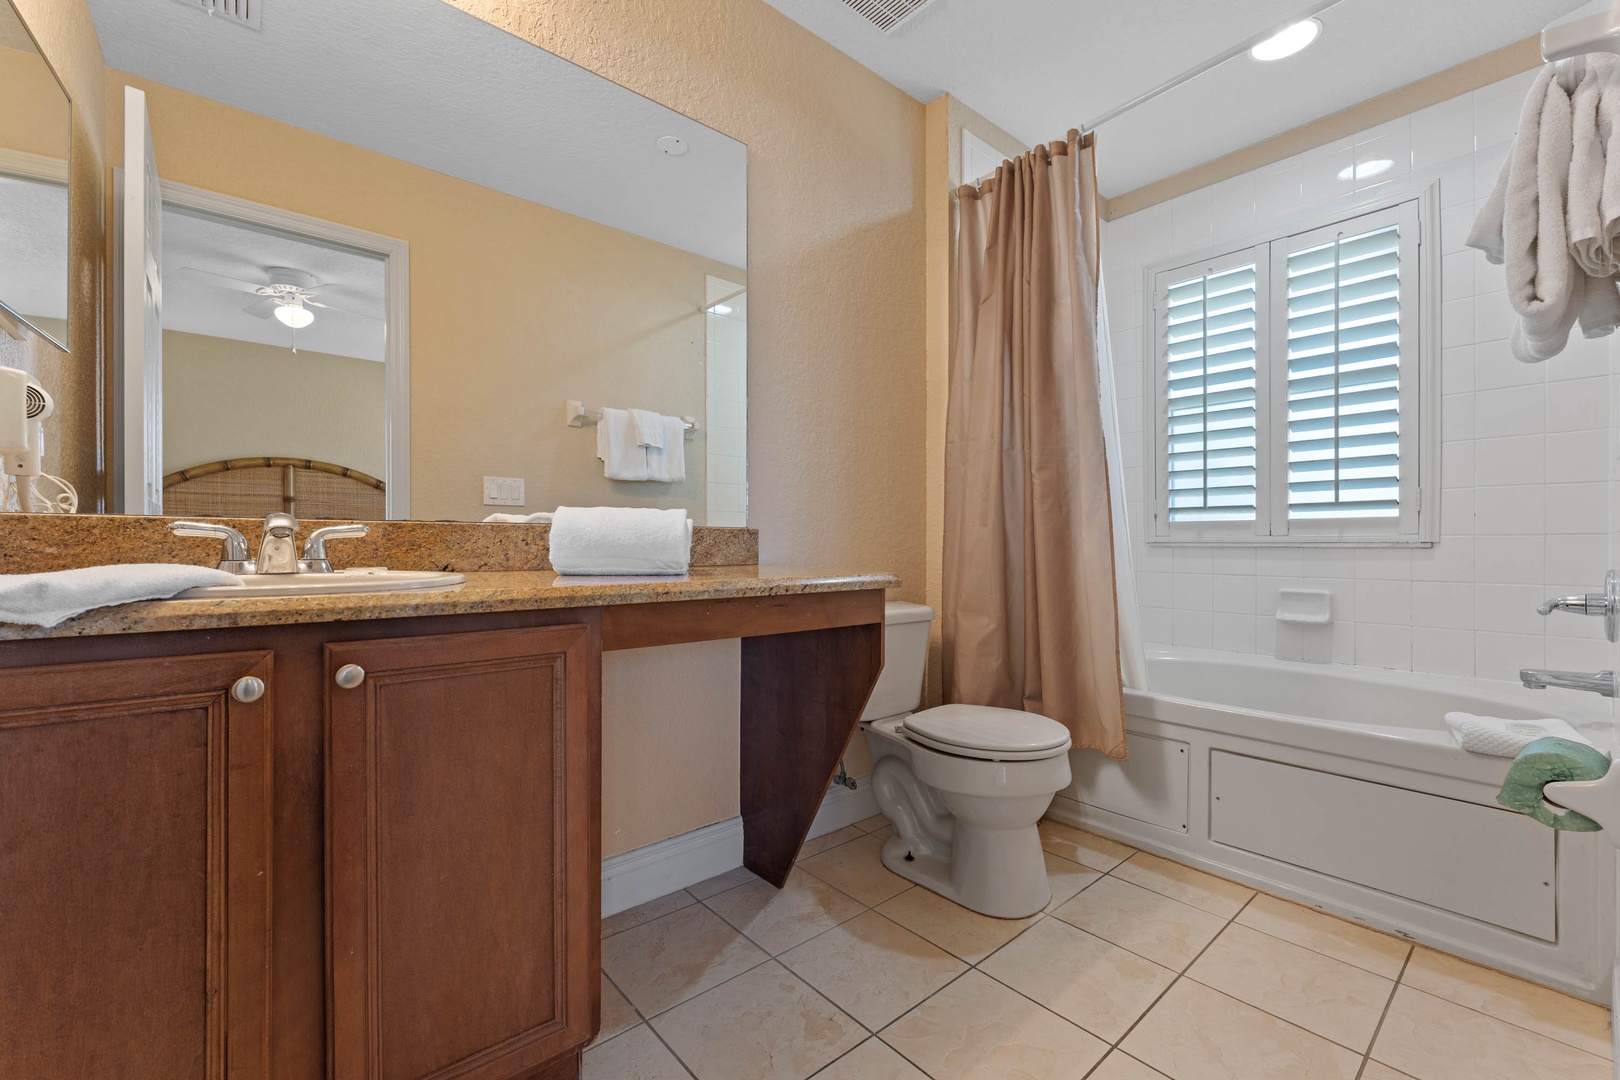 The 2nd floor ensuite bath offers a large vanity & shower/soaking tub combo